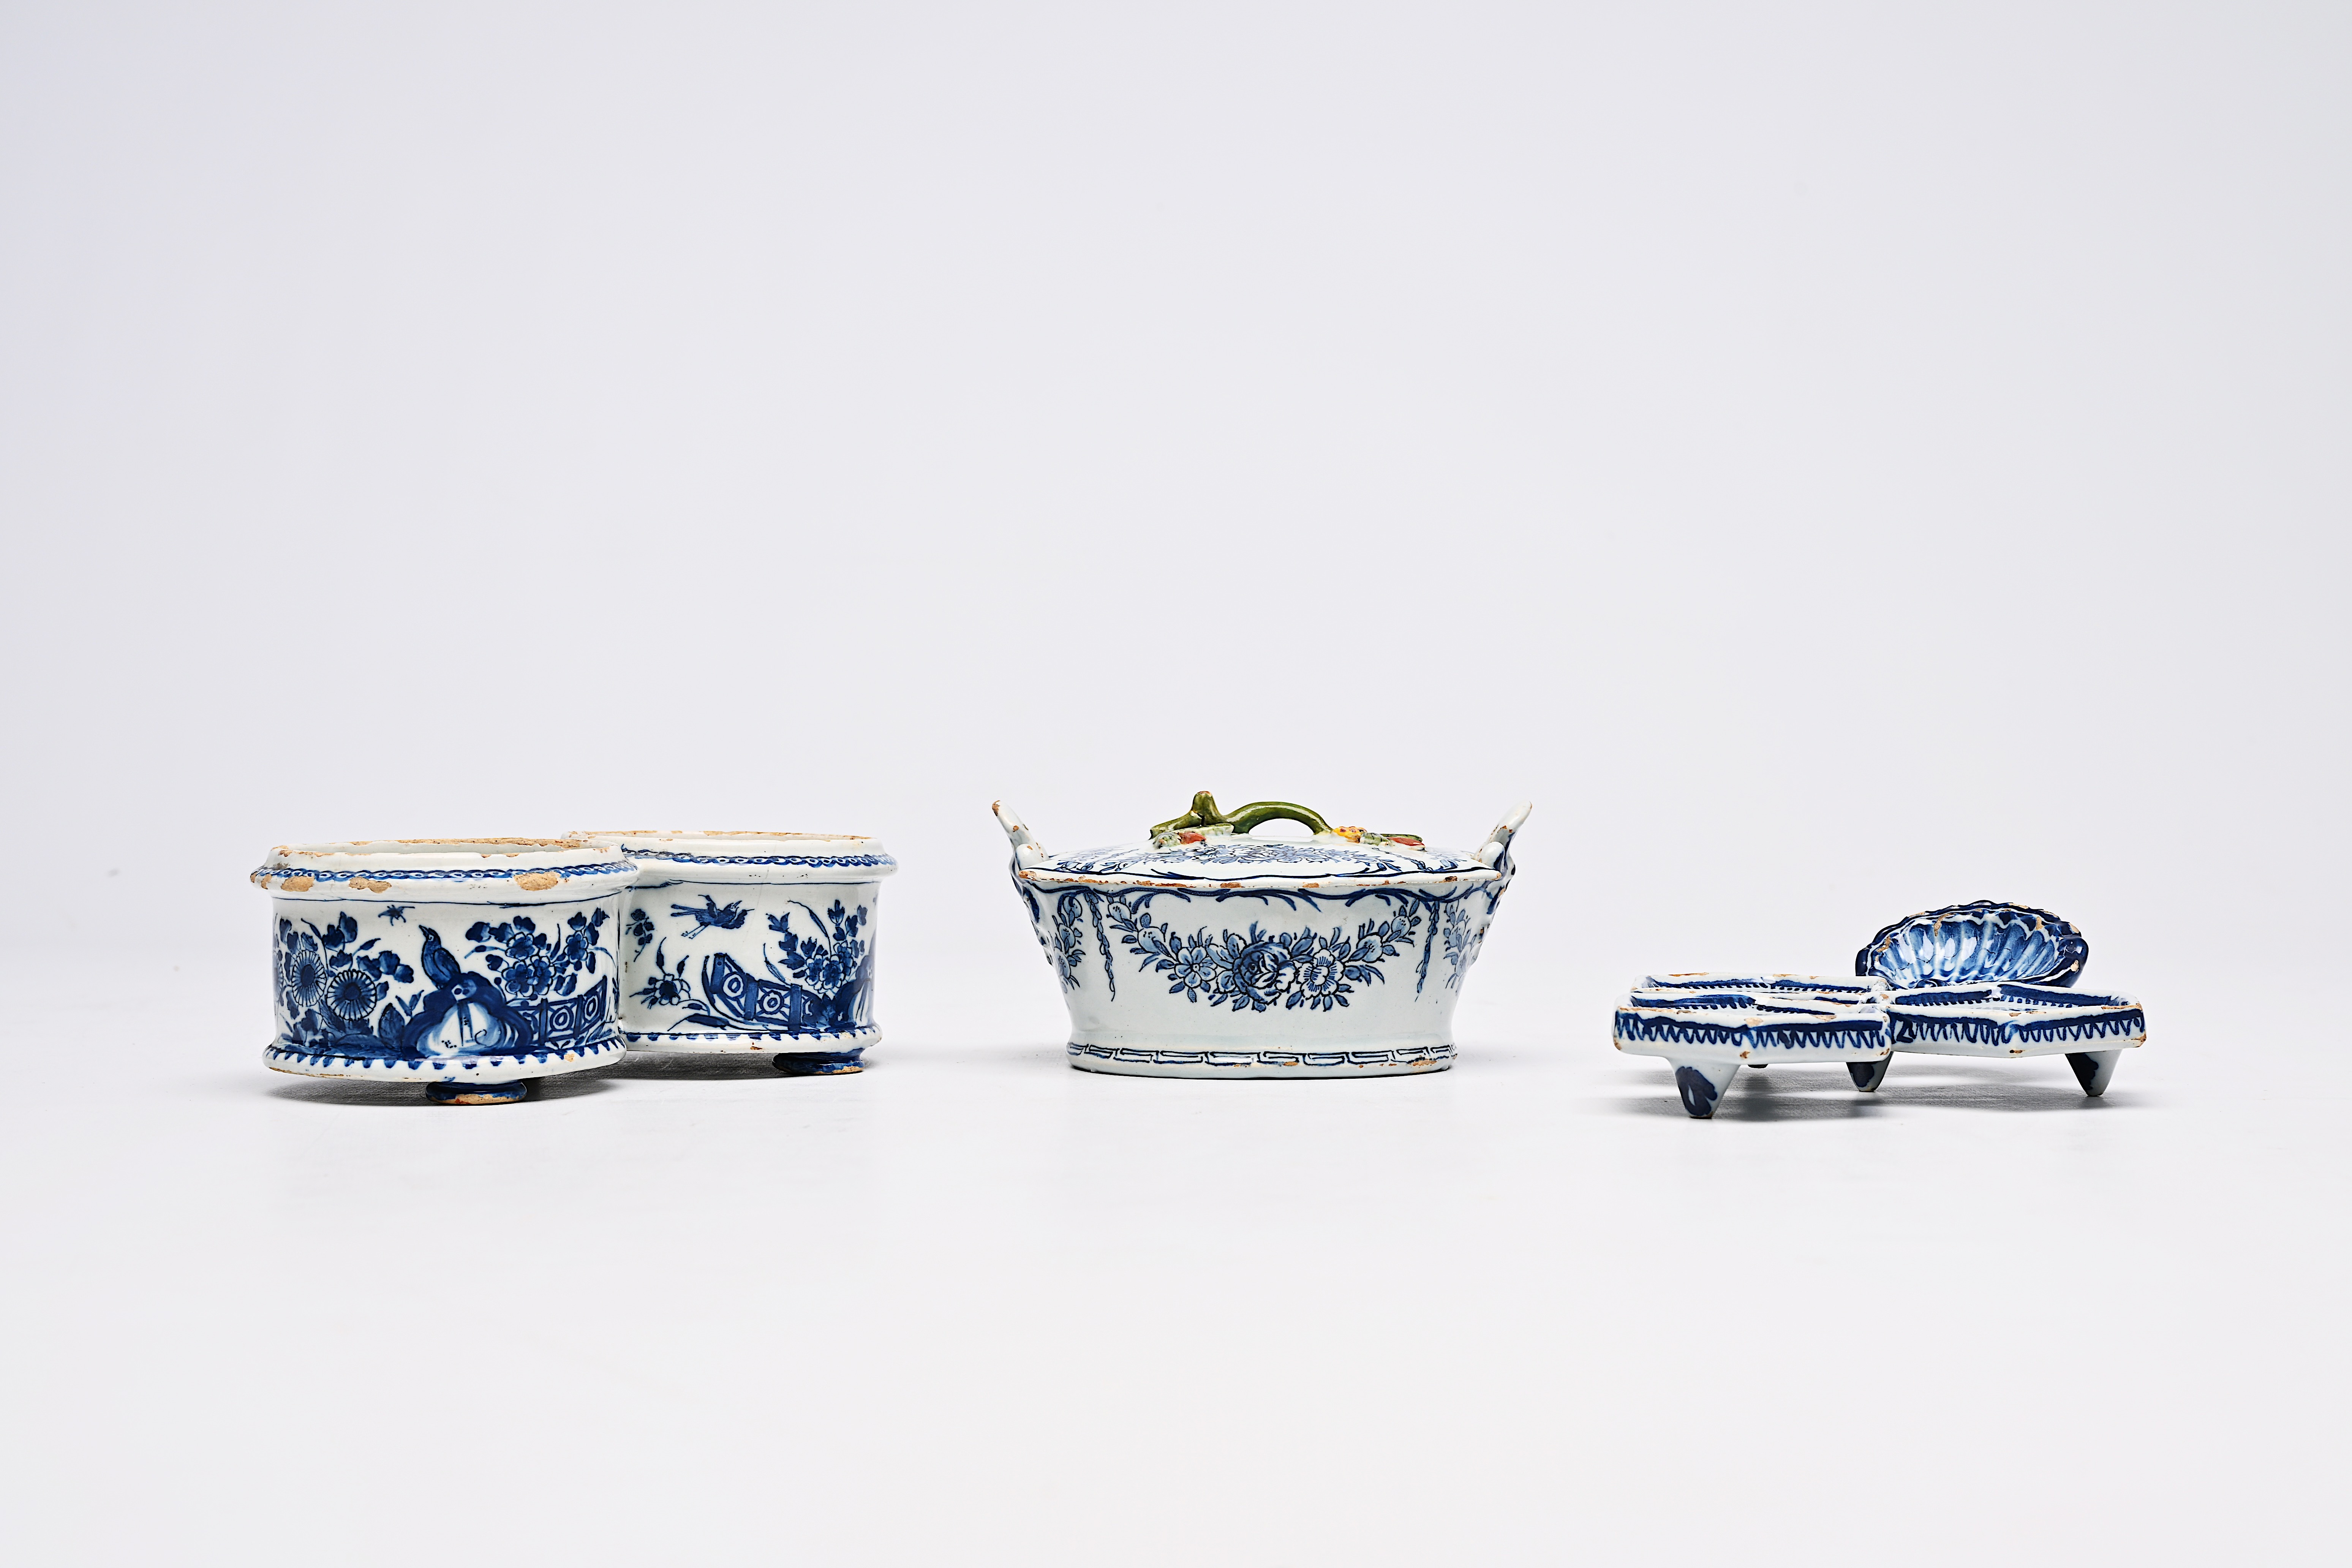 A Dutch Delft blue and white butter tub, an oil and vinegar holder and a spice dish with floral desi - Image 3 of 9